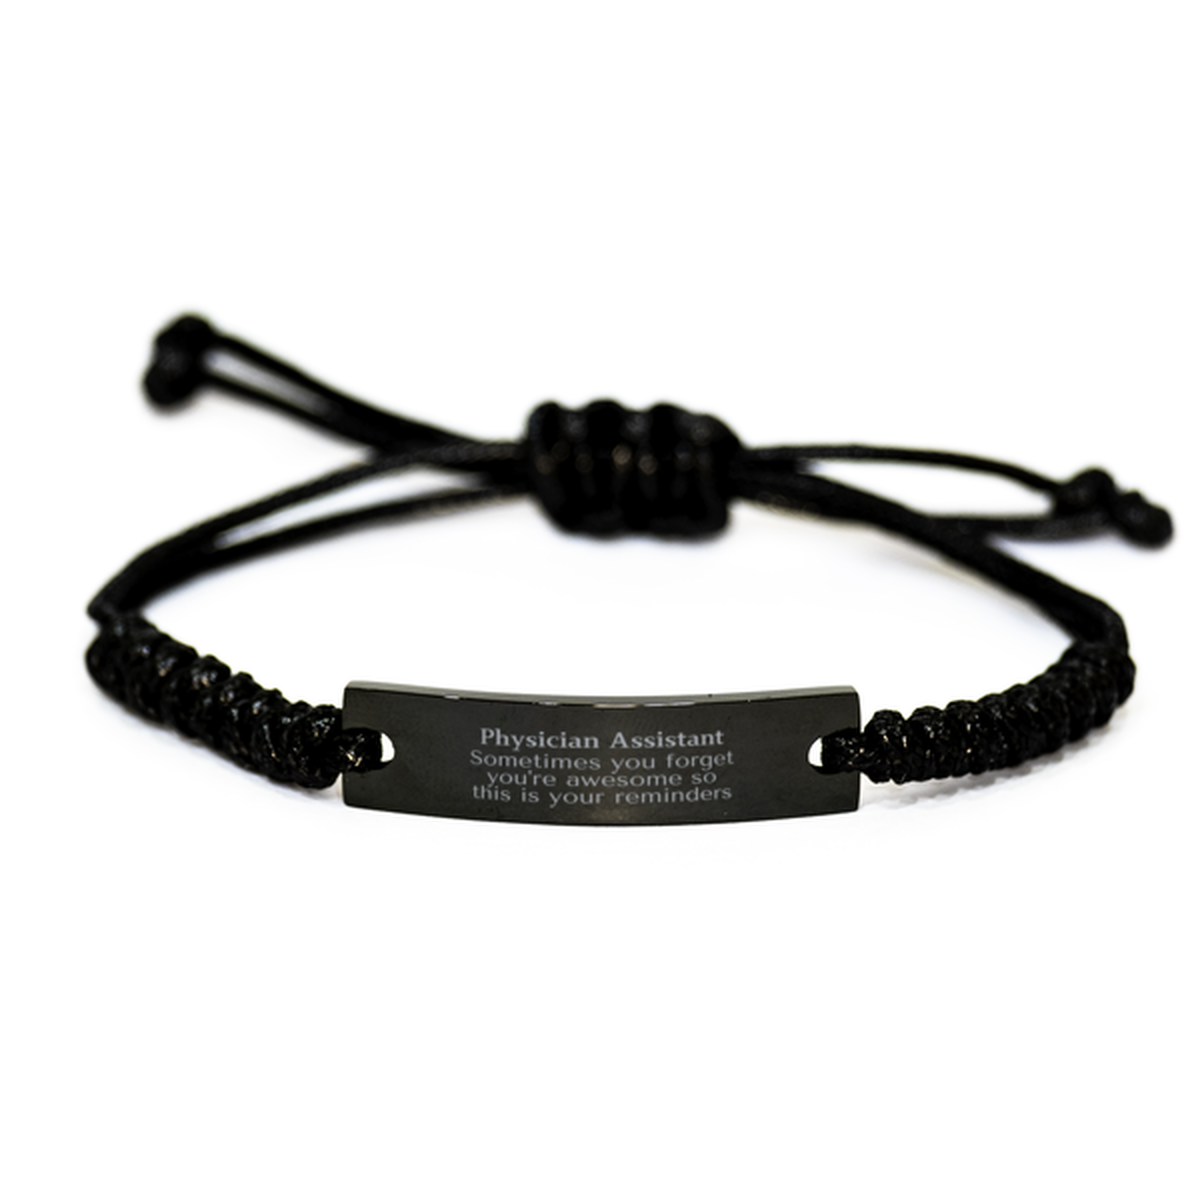 Sentimental Physician Assistant Black Rope Bracelet, Physician Assistant Sometimes you forget you're awesome so this is your reminders, Graduation Christmas Birthday Gifts for Physician Assistant, Men, Women, Coworkers